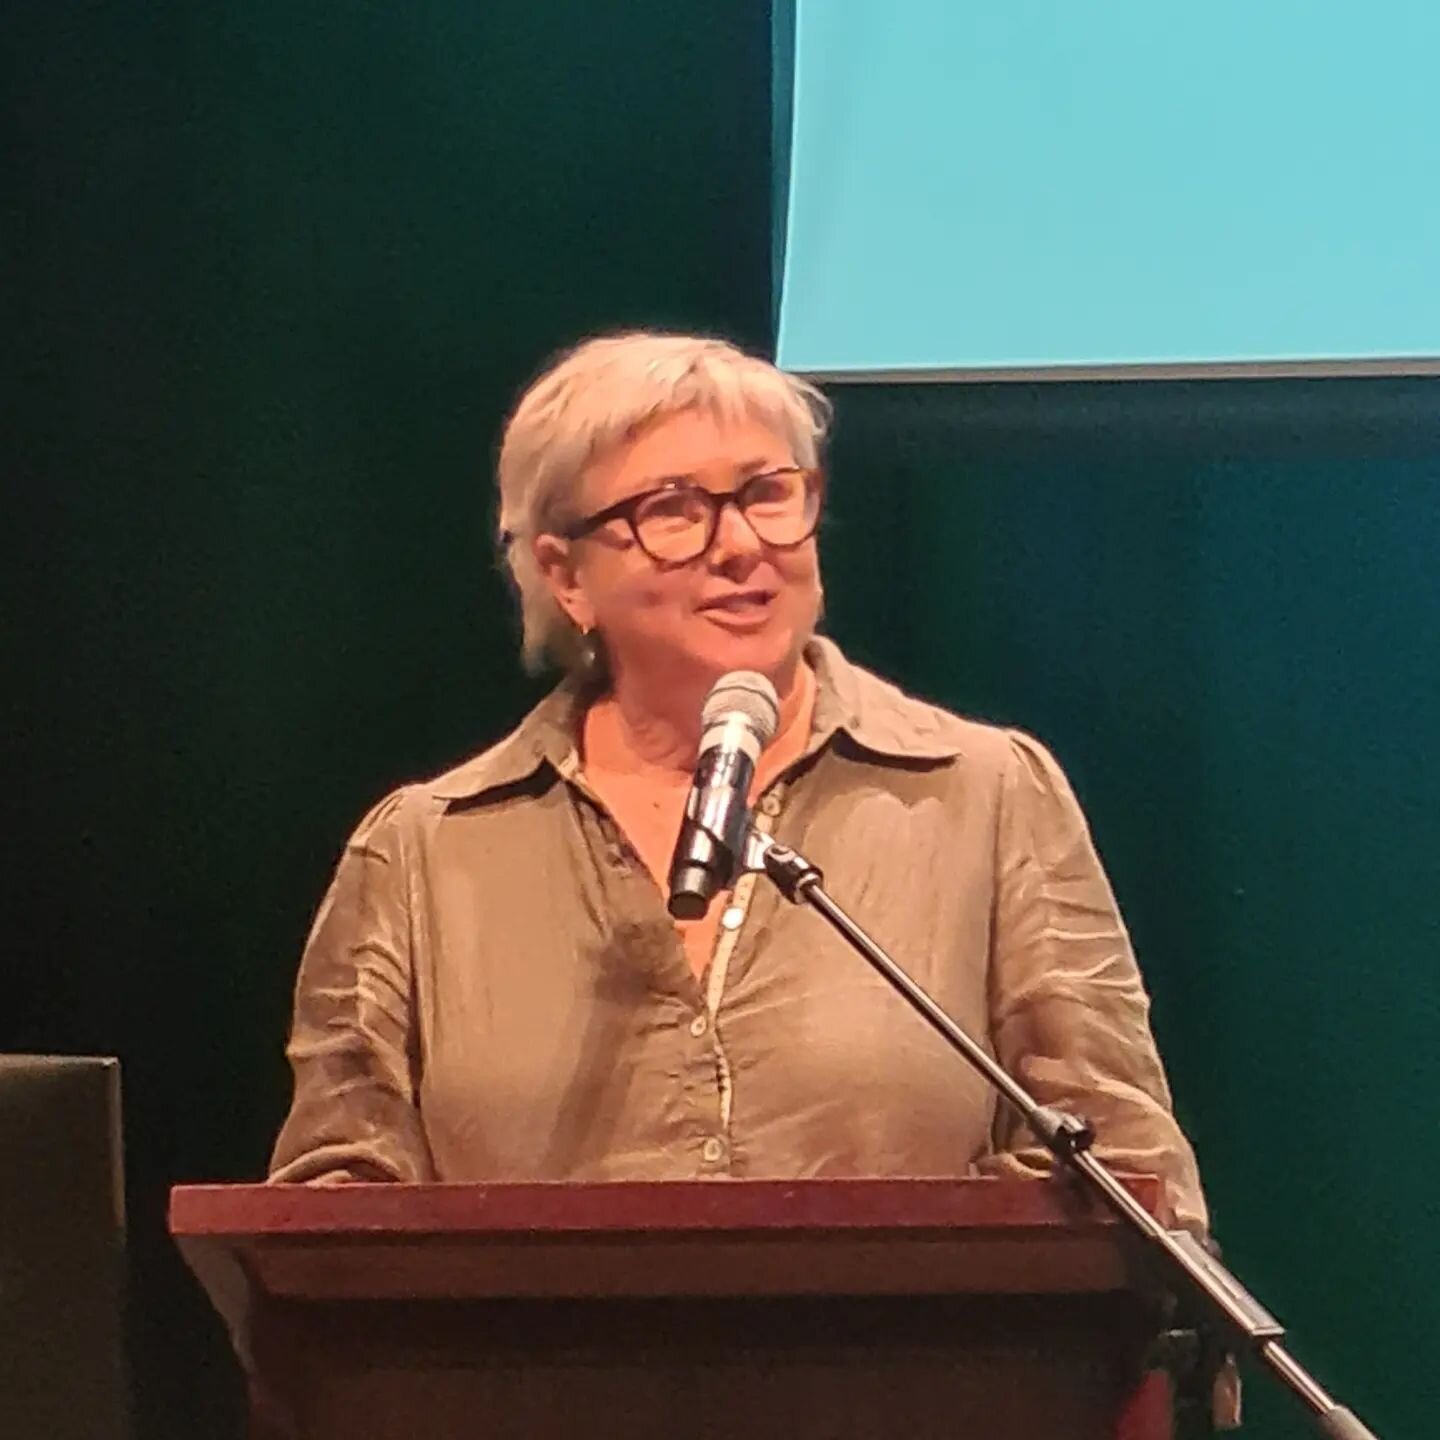 DR Adele Wessel kicls off the Richmond River Research Symposium on until 1pm at Whitebrook Theatre SCU, all welcome!

&quot;If it is true that people will defend what they love, it is time we recognised the love that people have had for the River ove